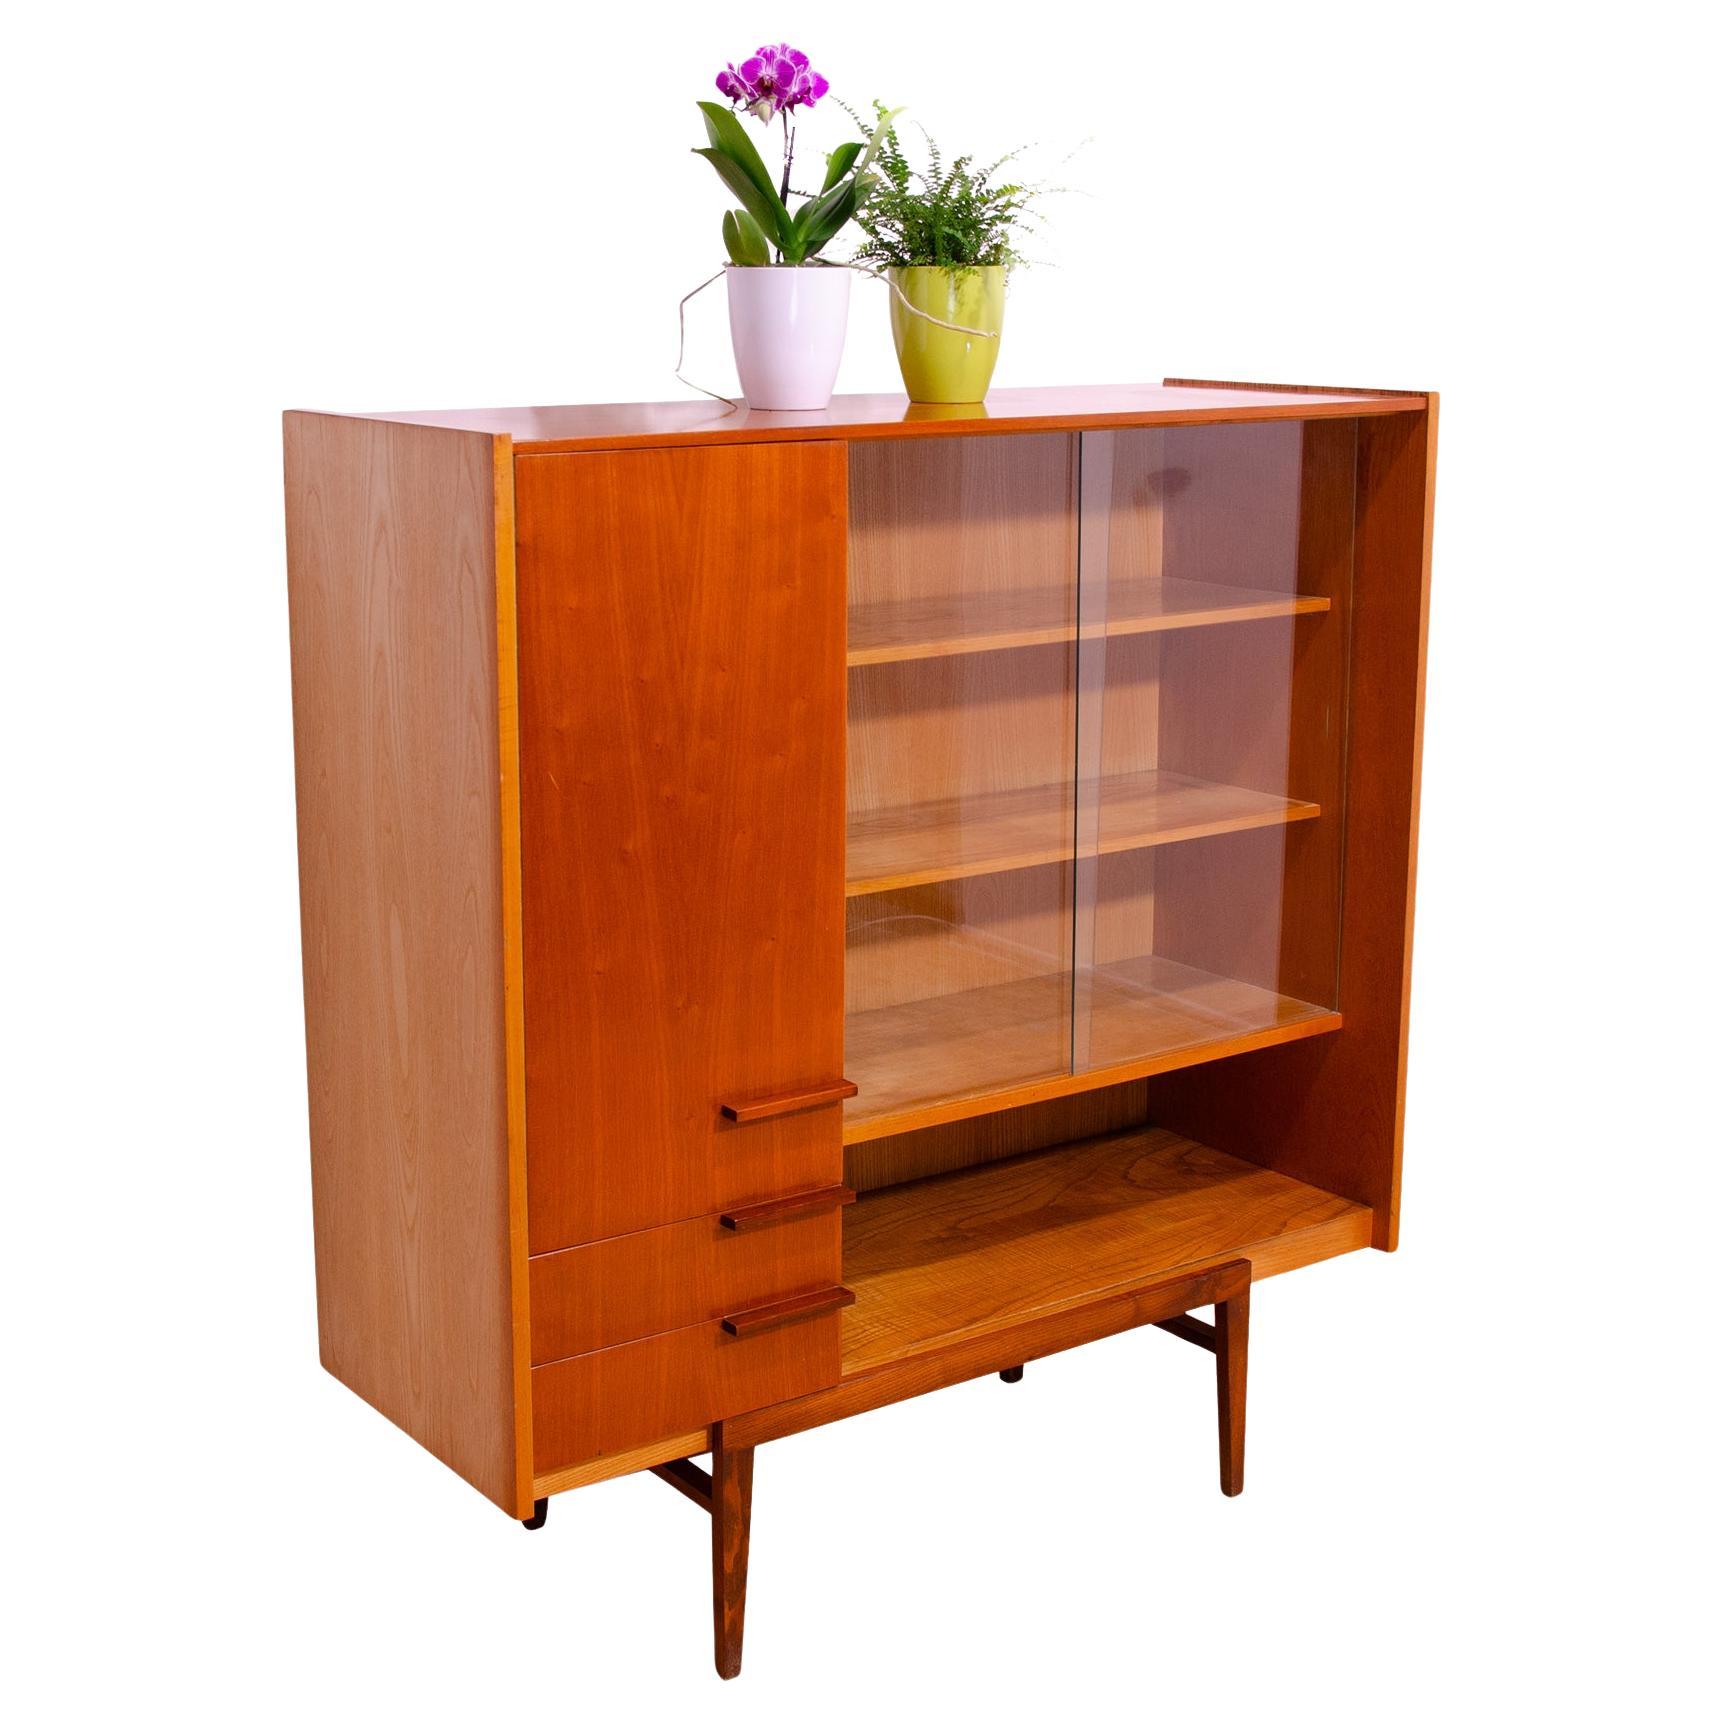 Mid century Czechoslovak Library cabinet, designed by František Mezulánik and produced by ÚP Závody in the 1960´s. Material: beech wood, ash wood, plywood, glass.

The cabinet is in its very good original condition with signs of age and